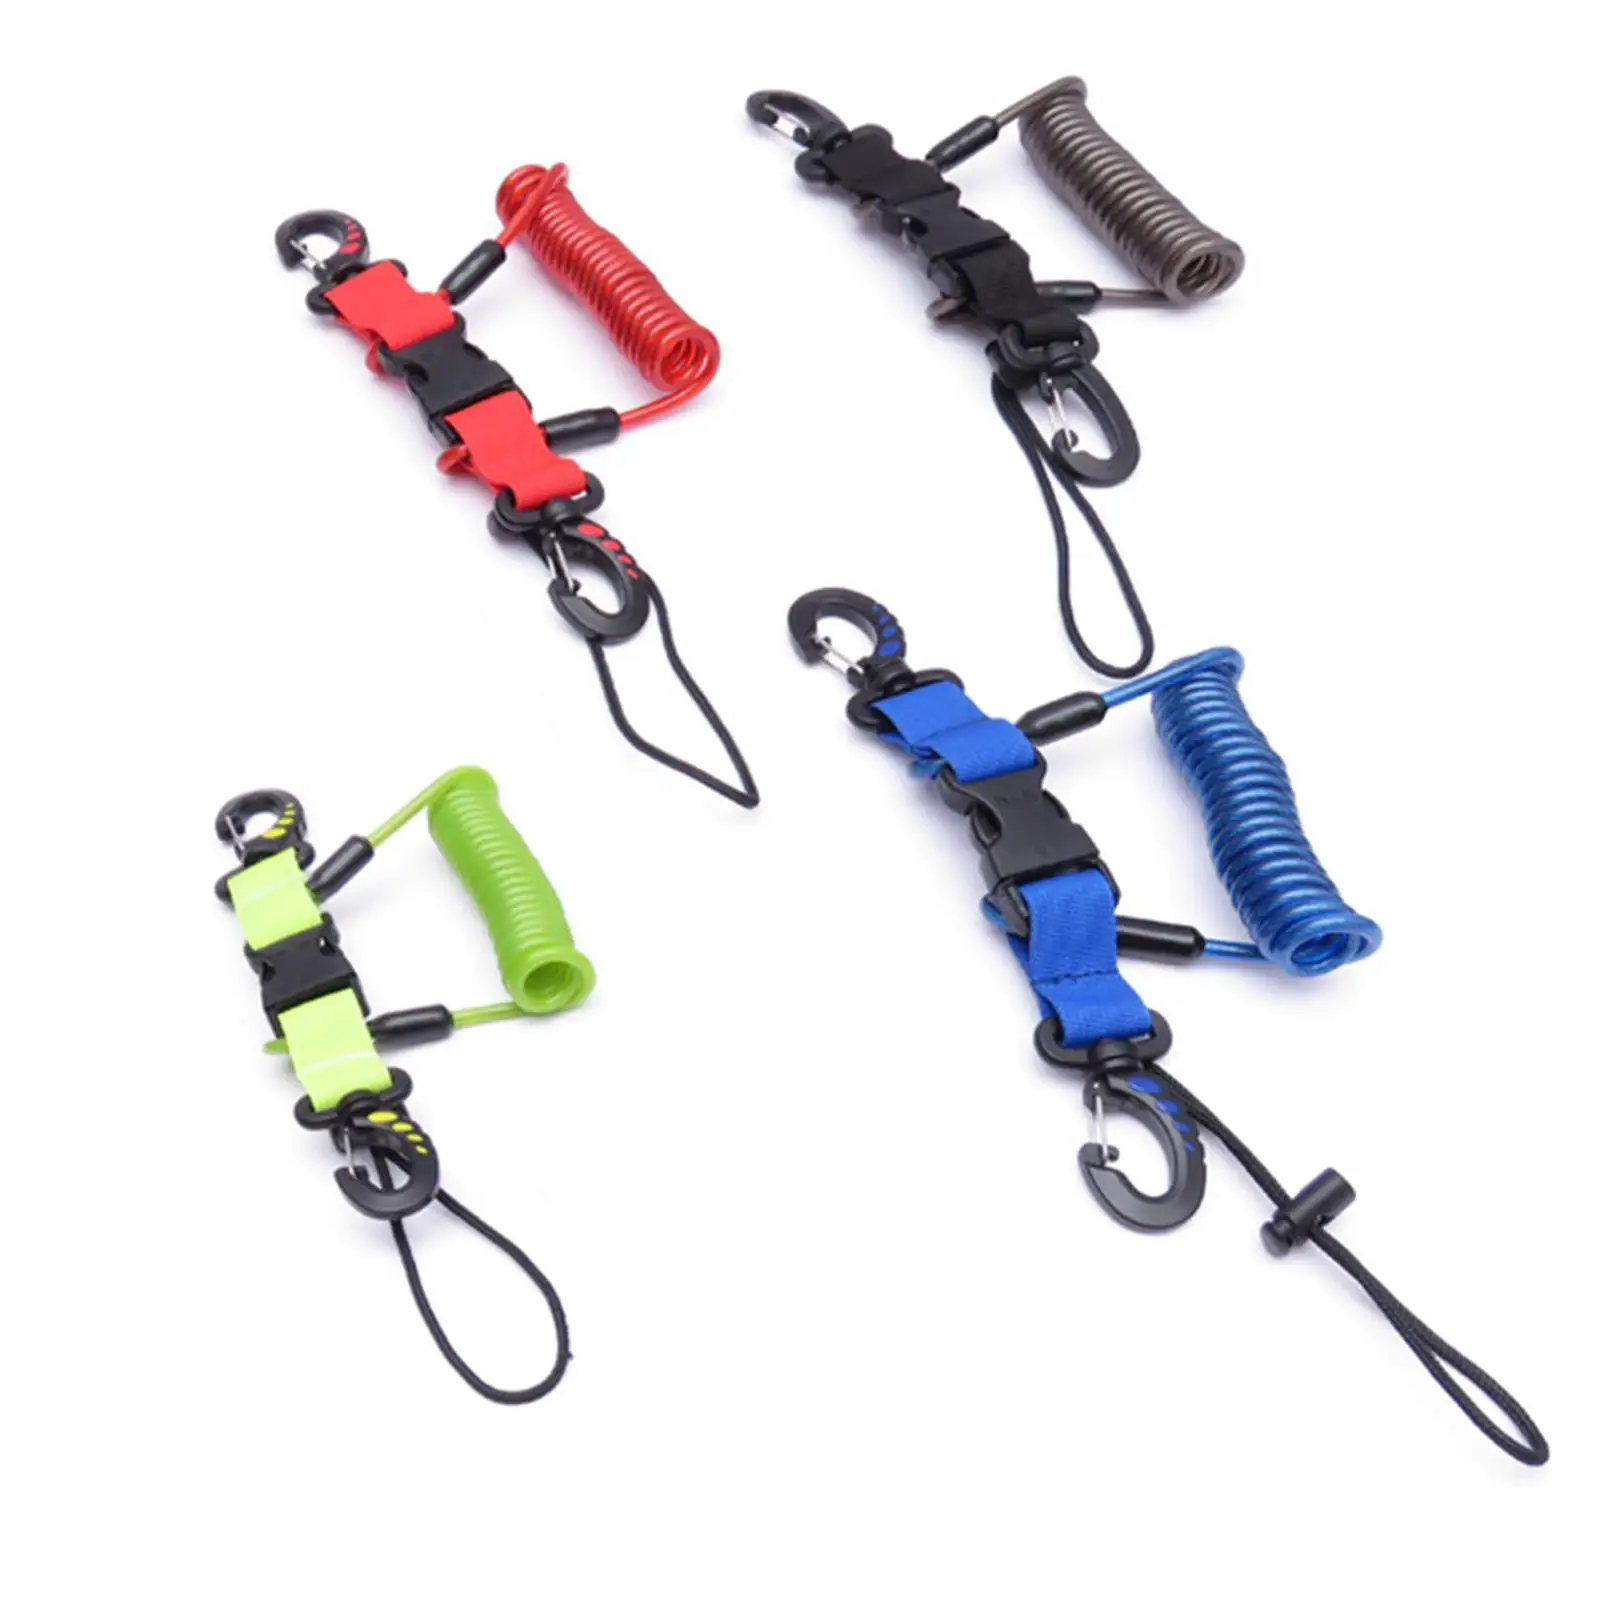 Scuba Diving Anti lost Spiral Spring Coil Lanyard Safety Emergency Tool with Quick Release Buckle